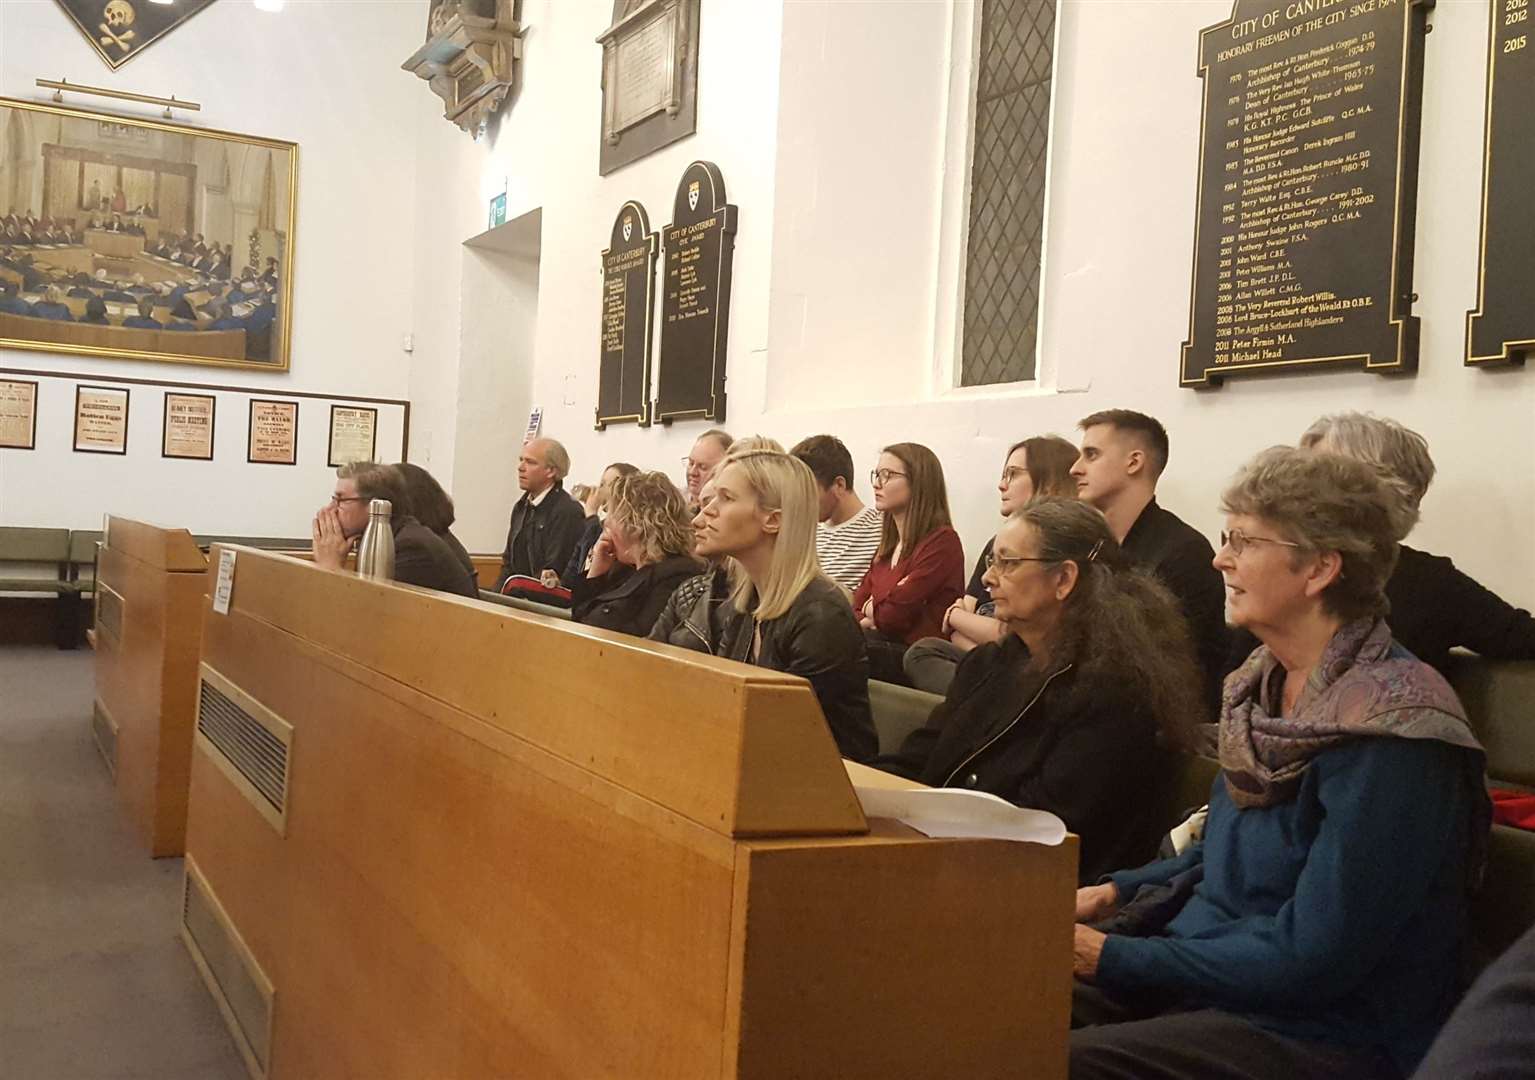 Some members of the public were unimpressed with the council's reaction